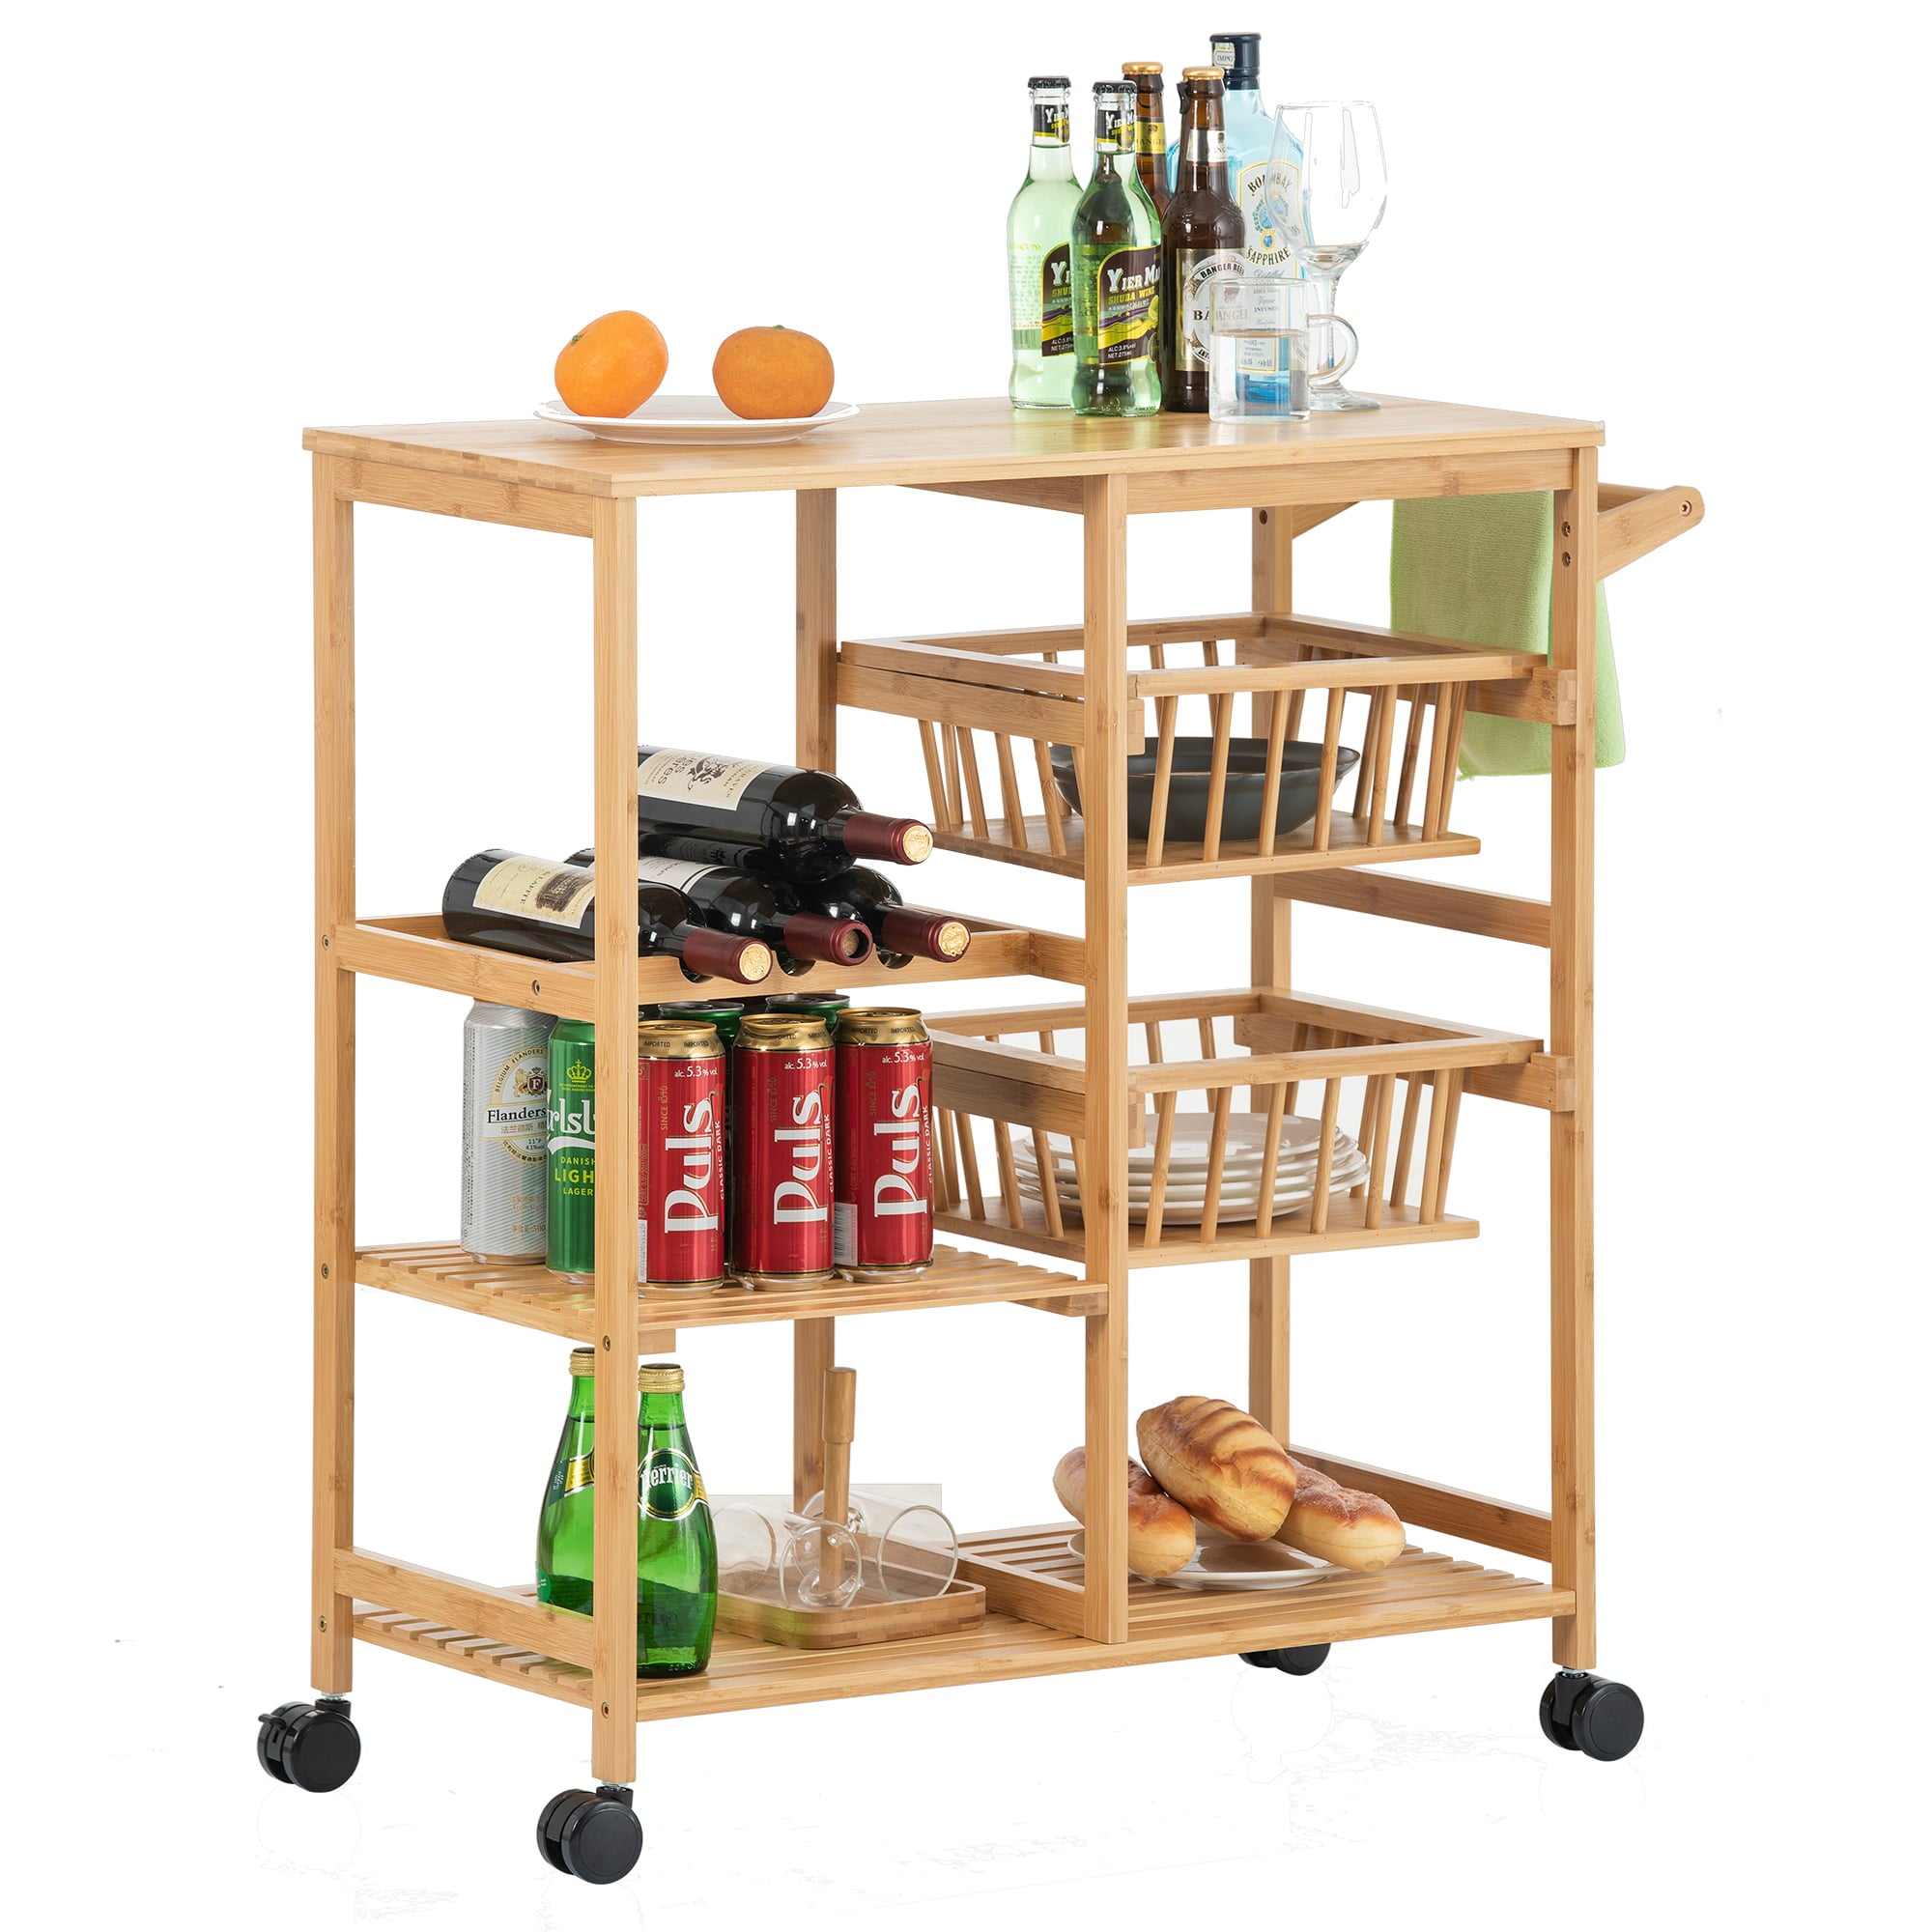 Rolling Kitchen Cart with Storage， BTMWAY Wood Kitchen Bakers Rack 3-Tier Utility Cart on Wheels， Counter Top Table Kitchen Microwave Cart with 2 Baskets， 3 Shelf， Walnut